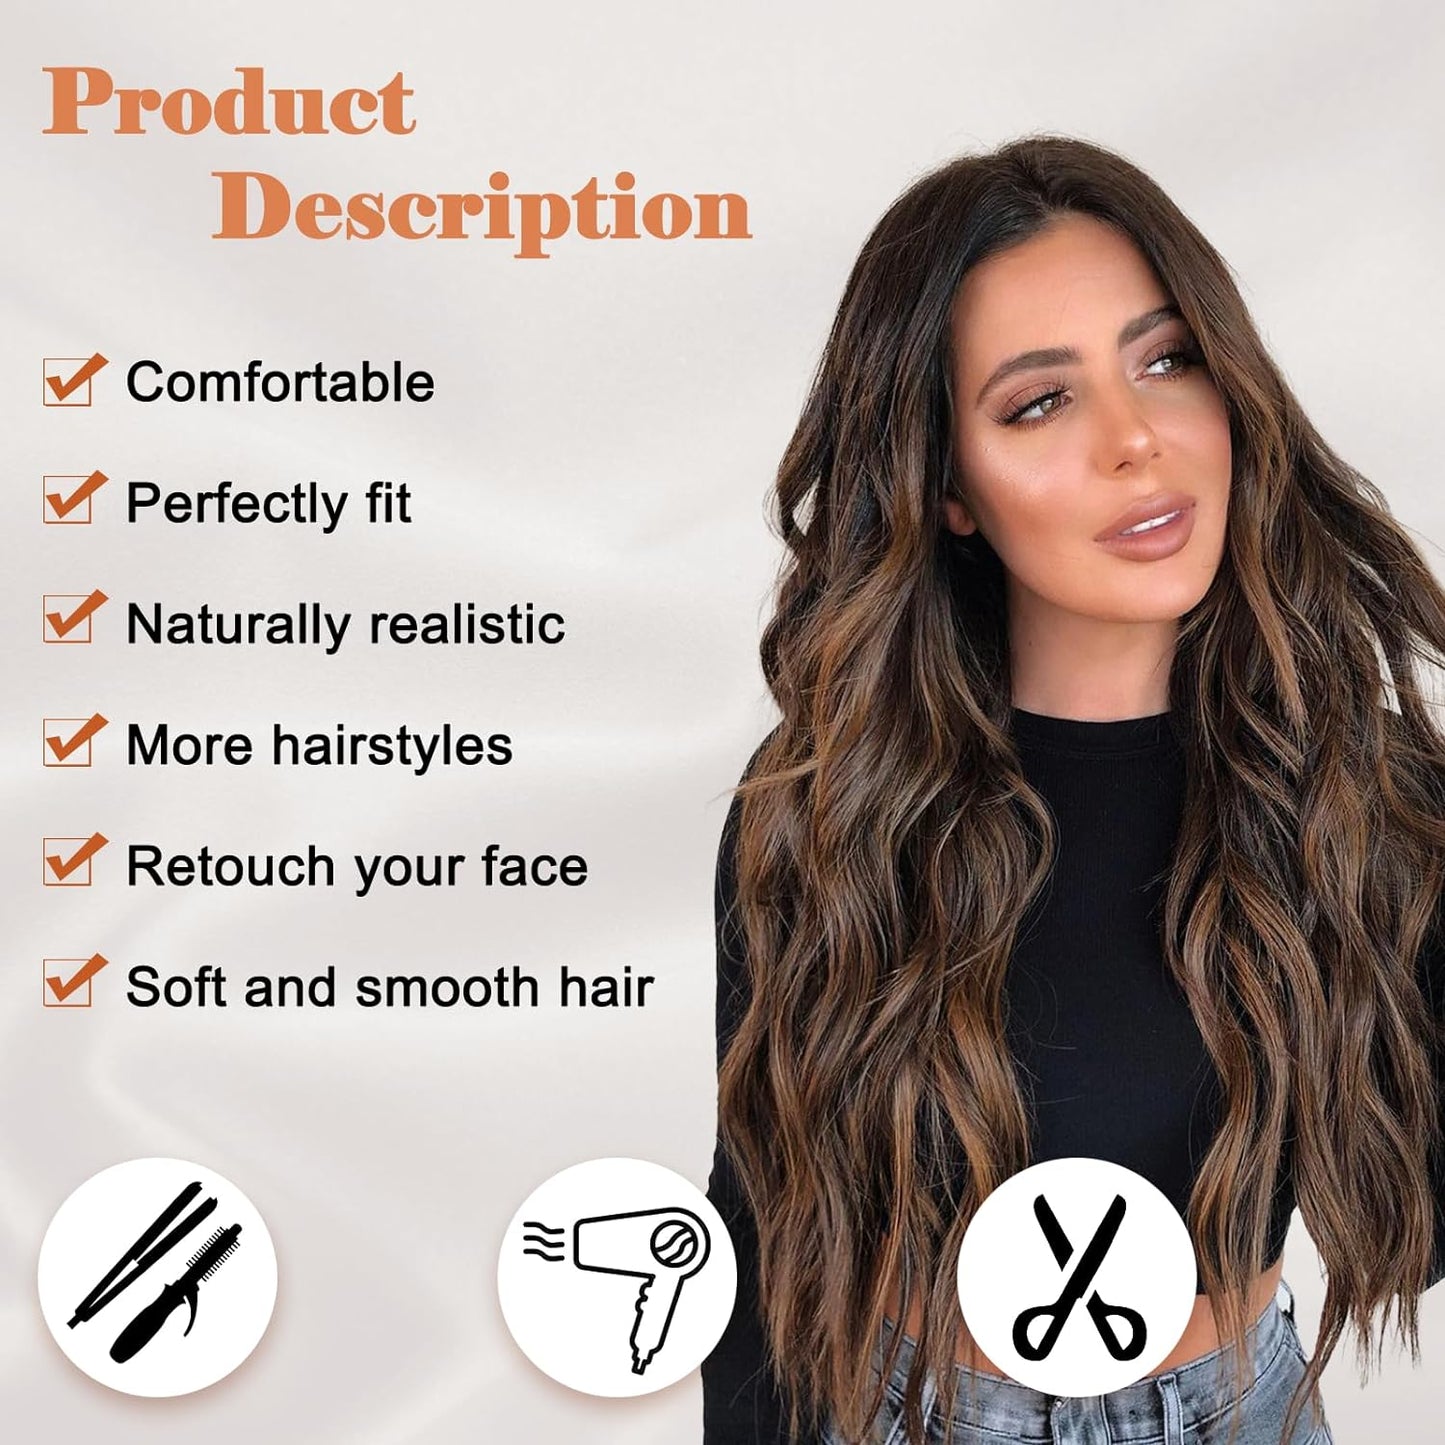 LUXURY EUROPEAN HAIR SYSTEM LONG HAIR | NON-SURGICAL SOLUTION TO WOMEN'S ALOPECIA, THINNING HAIRLOSS | Ready 2 Wear Professional Pre-Color Highlight Balayage Virgin Human Hair